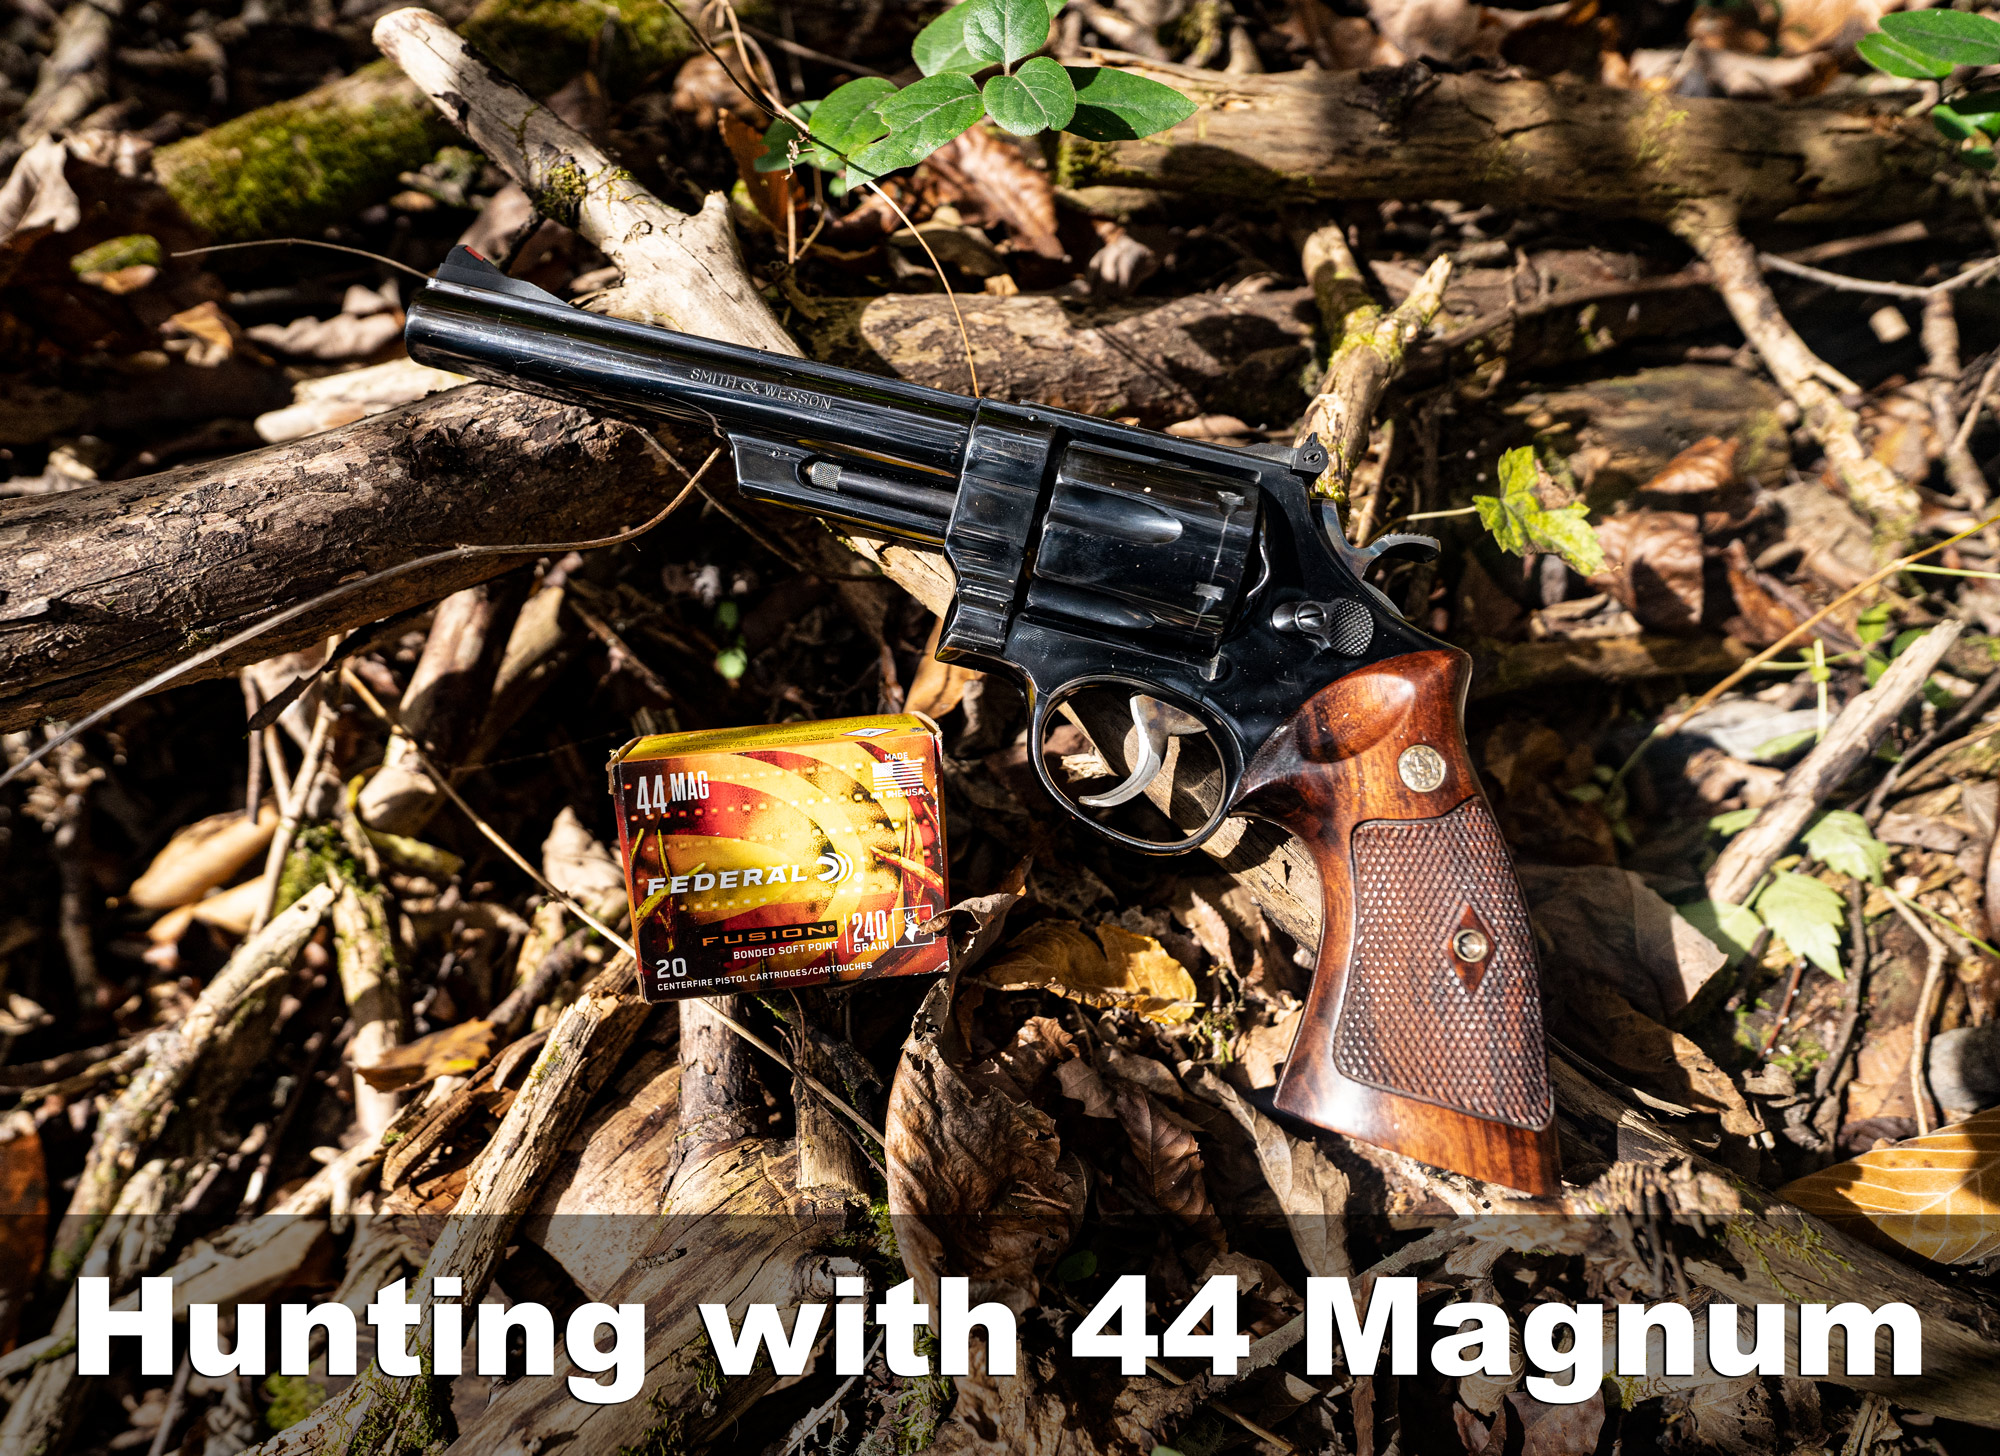 Hunting with a 44 magnum revolver